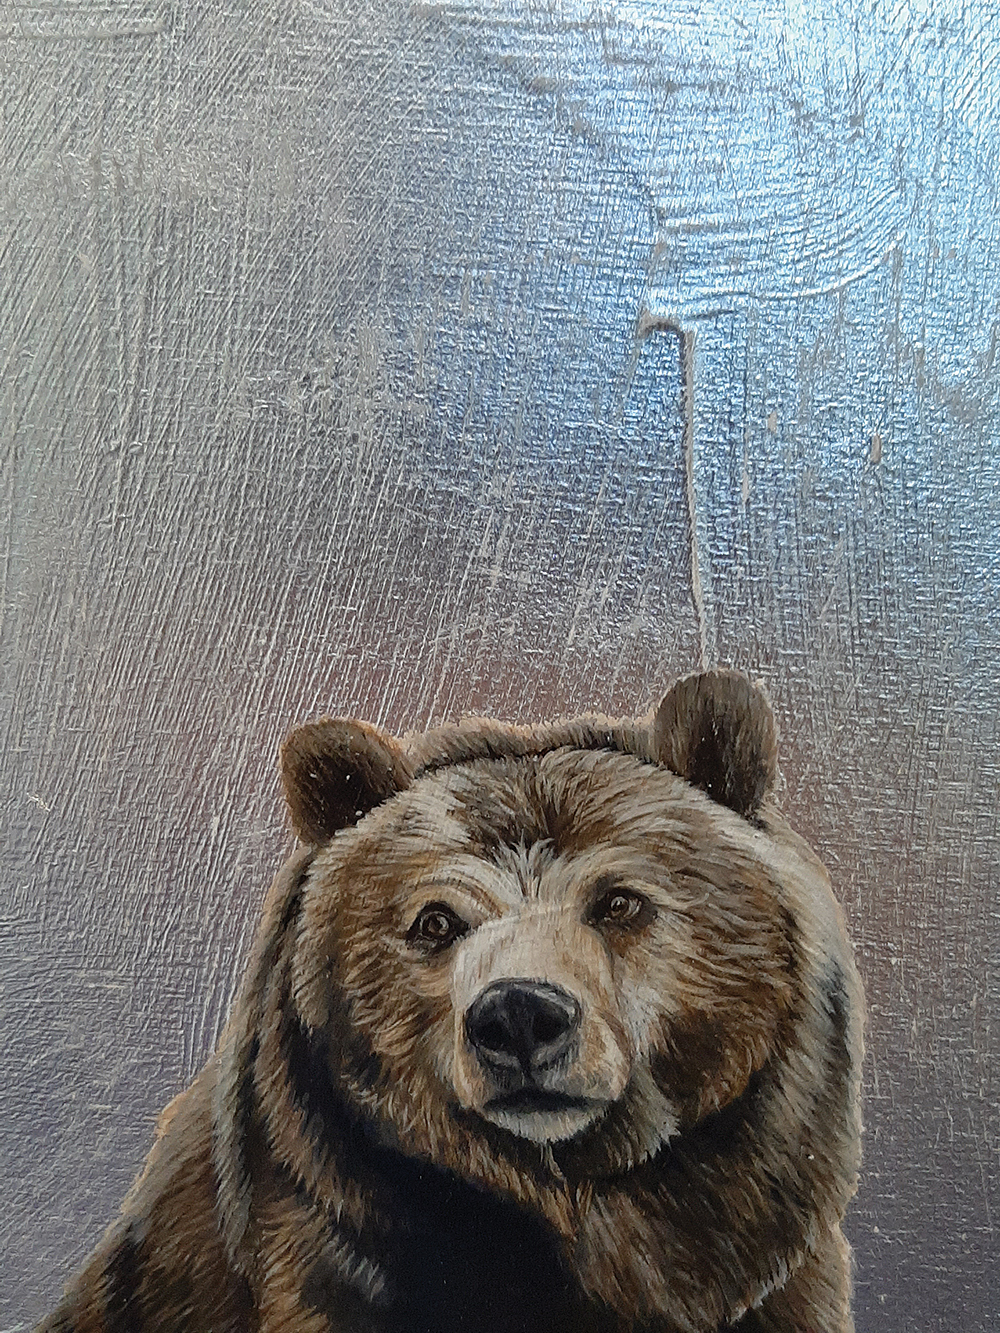 “Silver bear,” 8 x 8 inches, acrylic and silver leaf on wood.